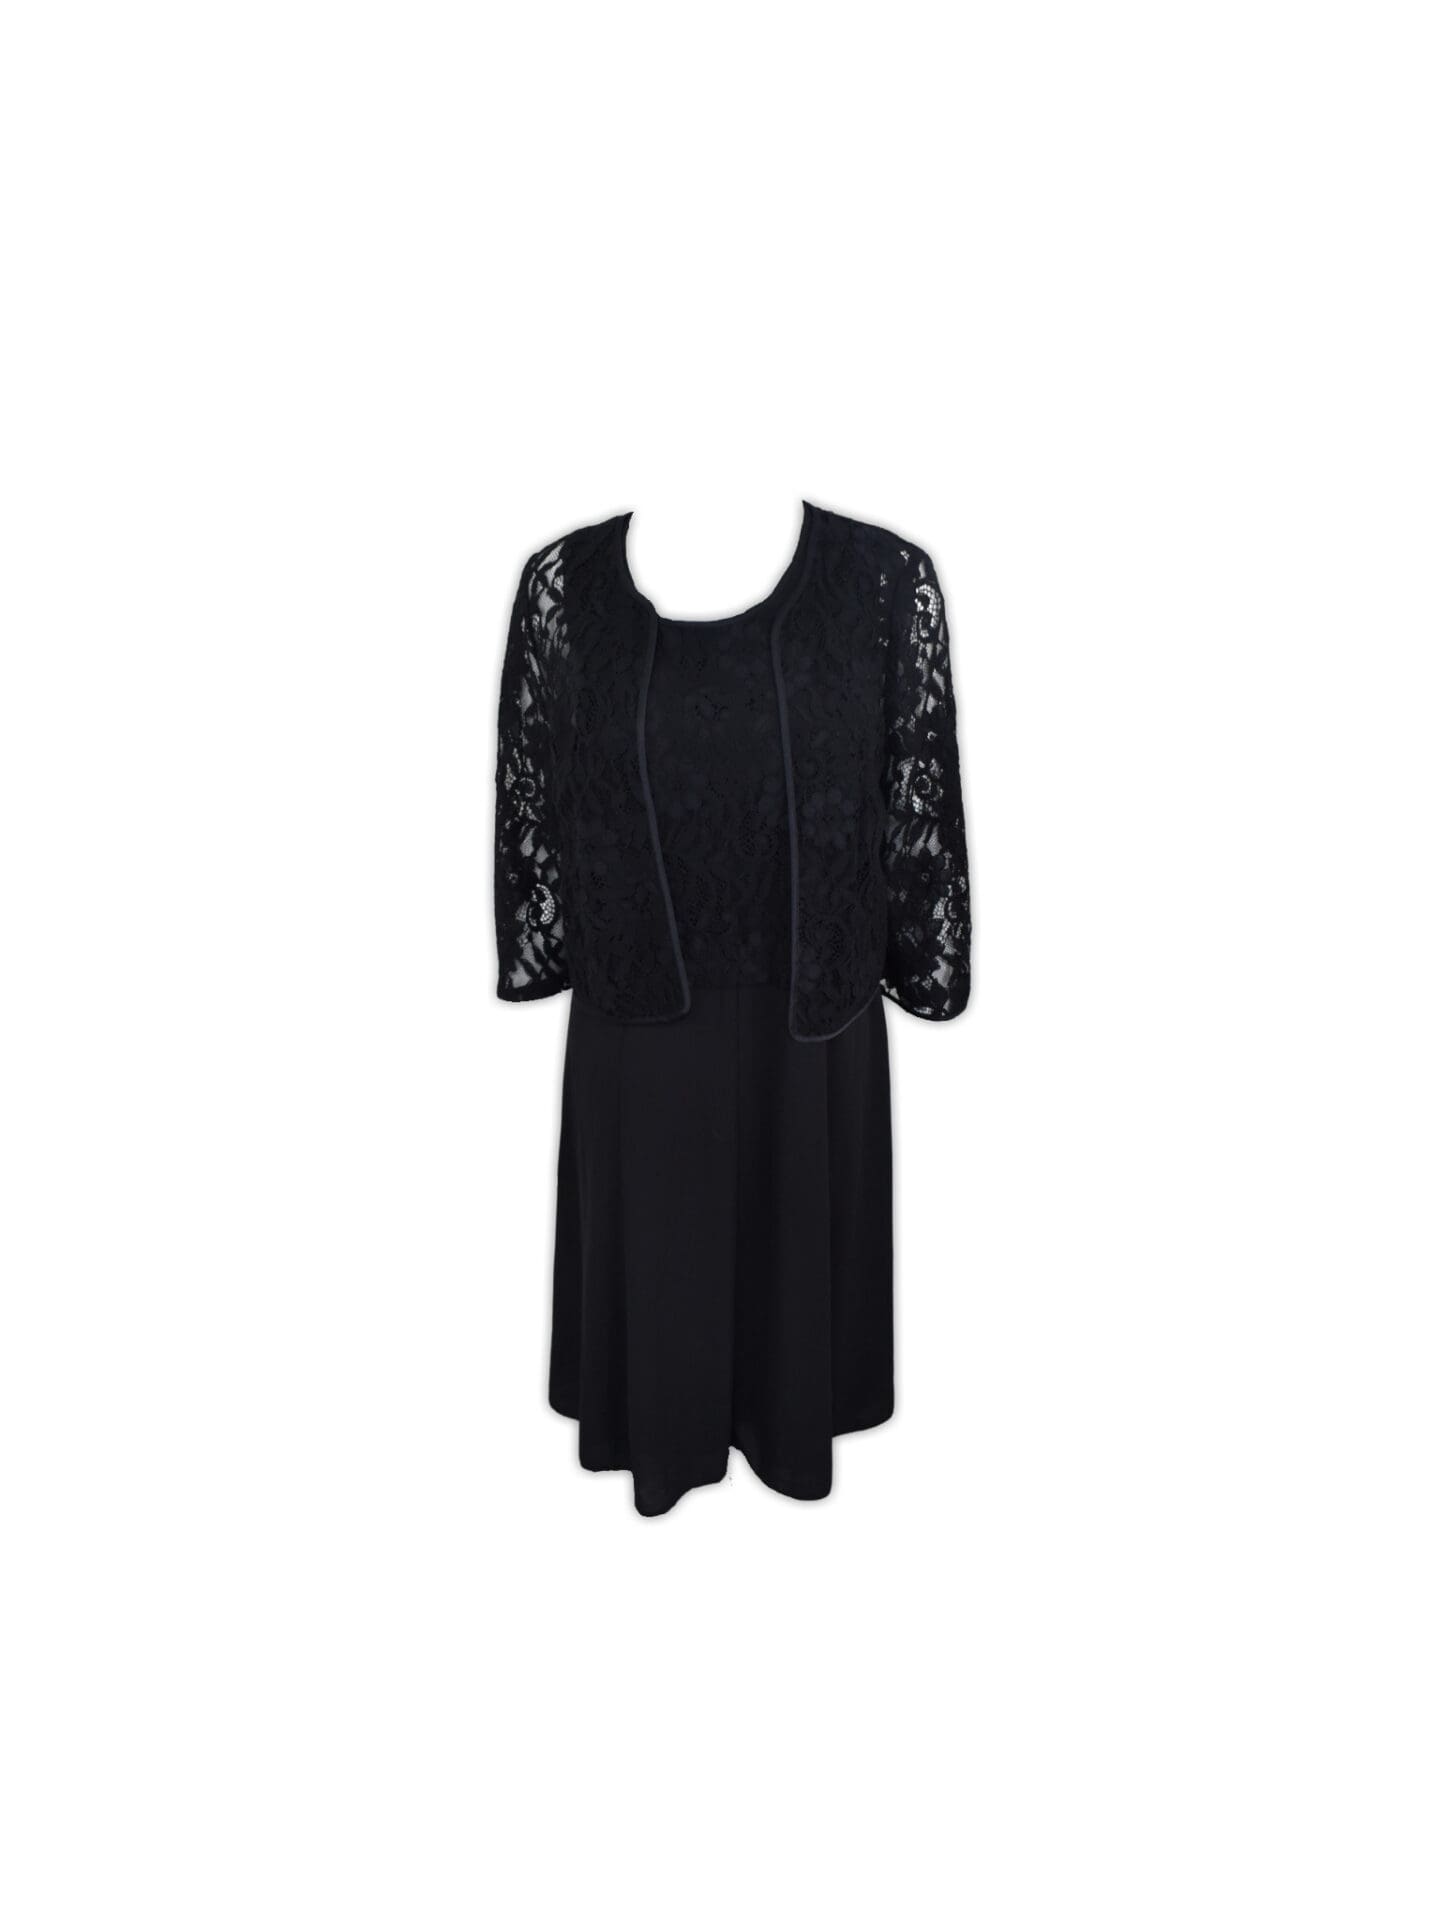 Black lace Beautiful dress with lace bodice and full skirt paired with a matching lace light weight jacket.